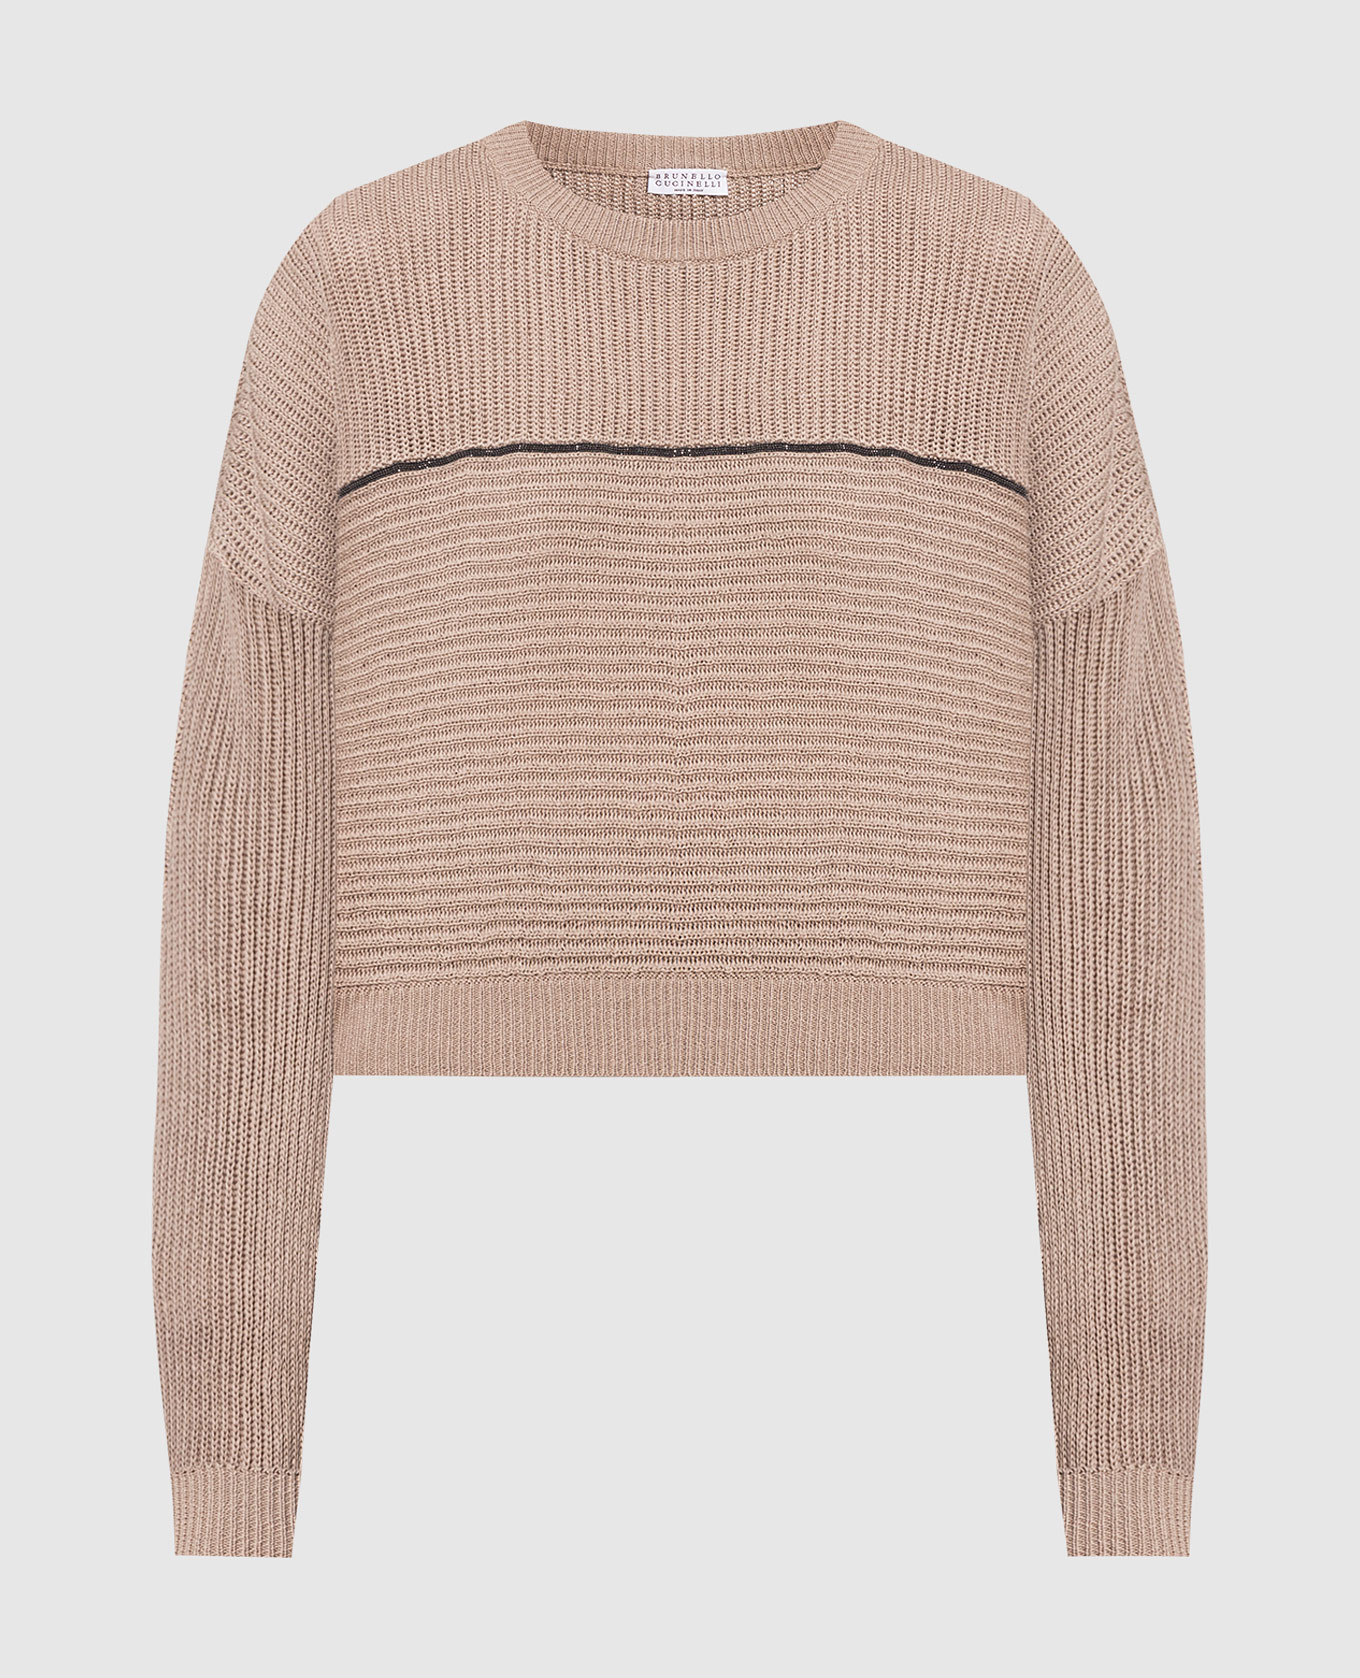 Brown sweater with monil chain